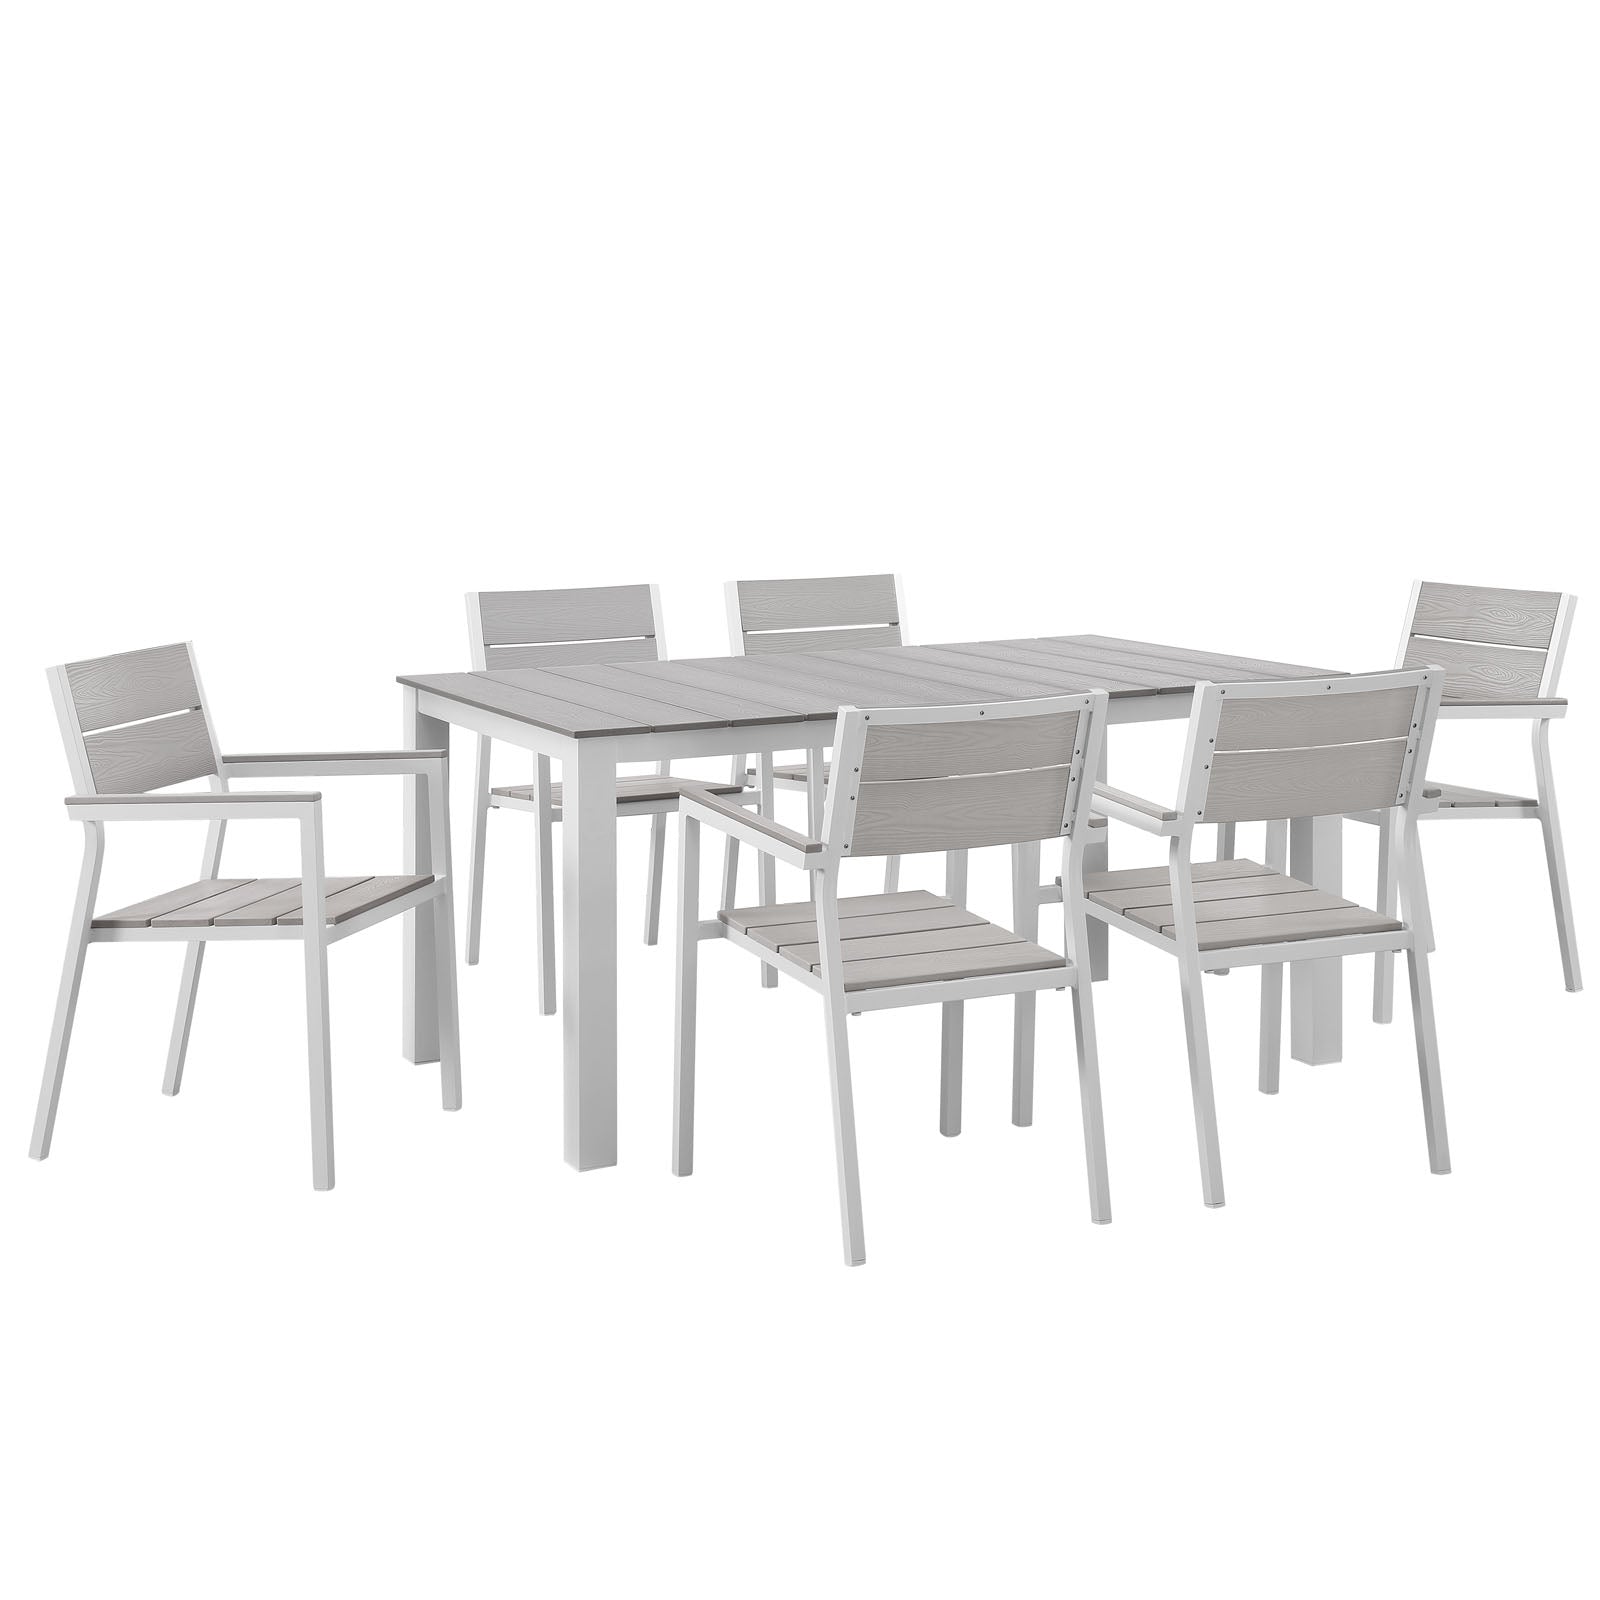 Maine 7 Piece Outdoor Patio Dining Set-Outdoor Dining Set-Modway-Wall2Wall Furnishings